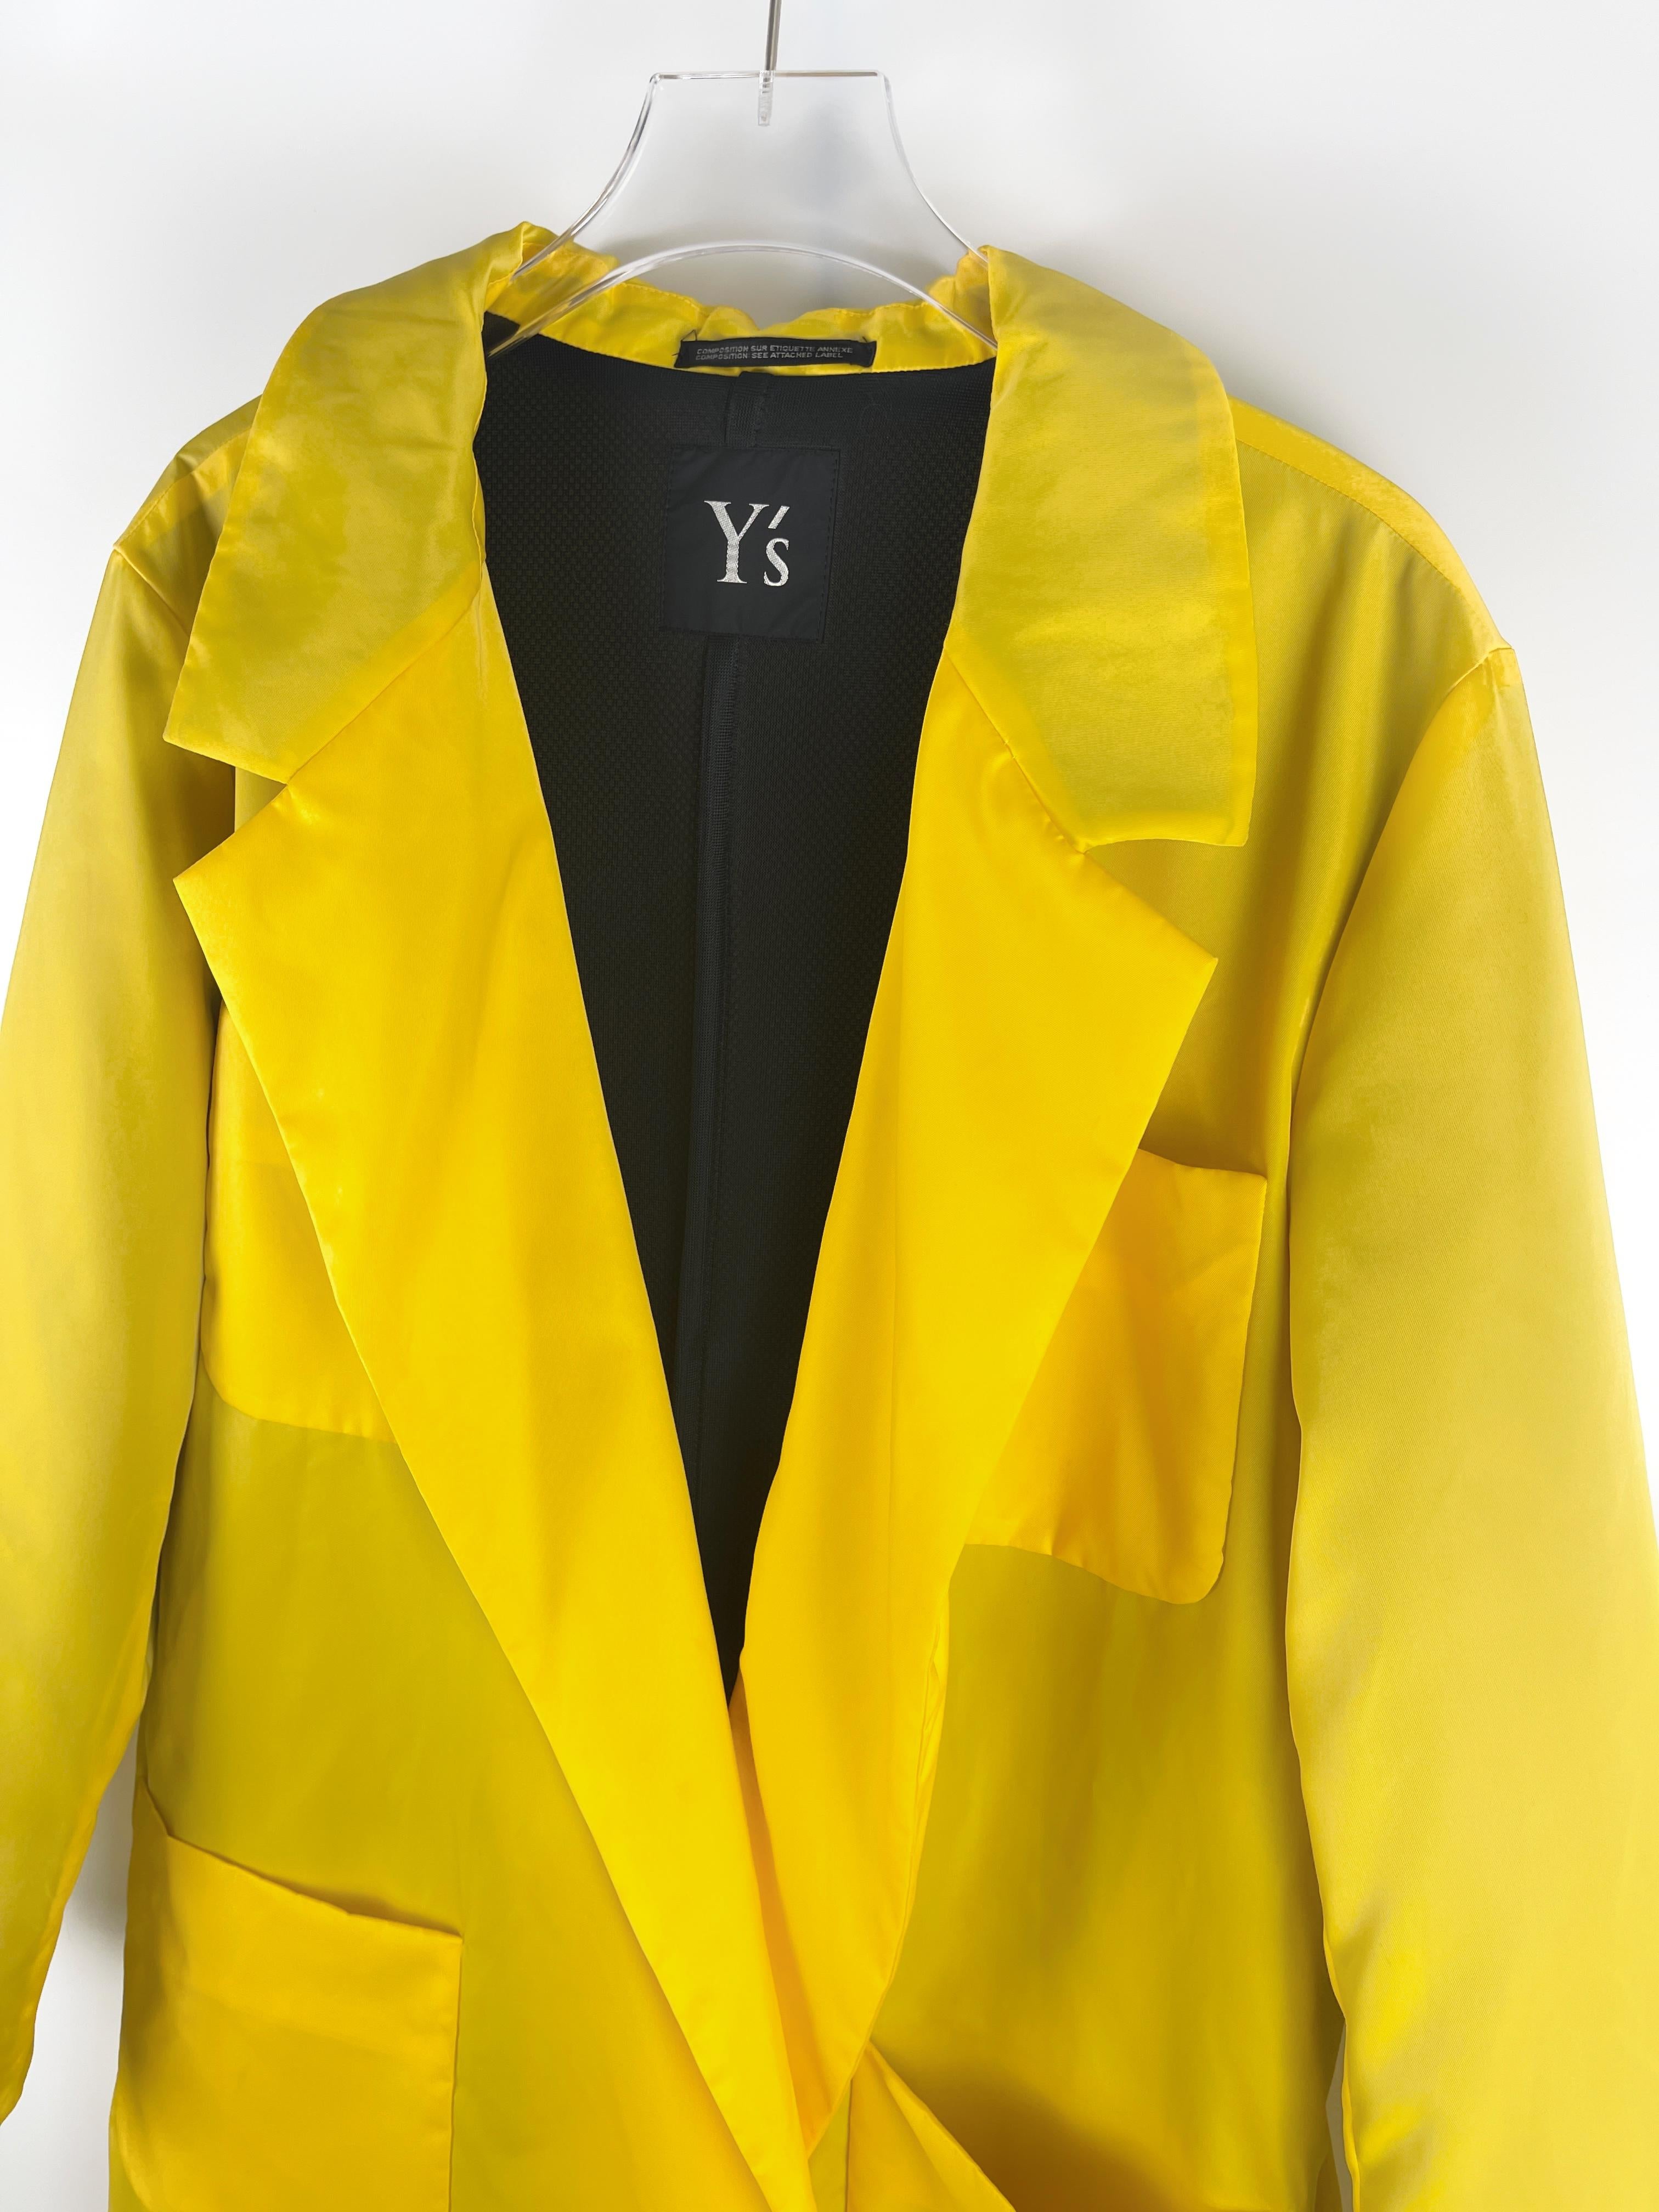 Y's Yellow Puffer Trench Coat For Sale 4